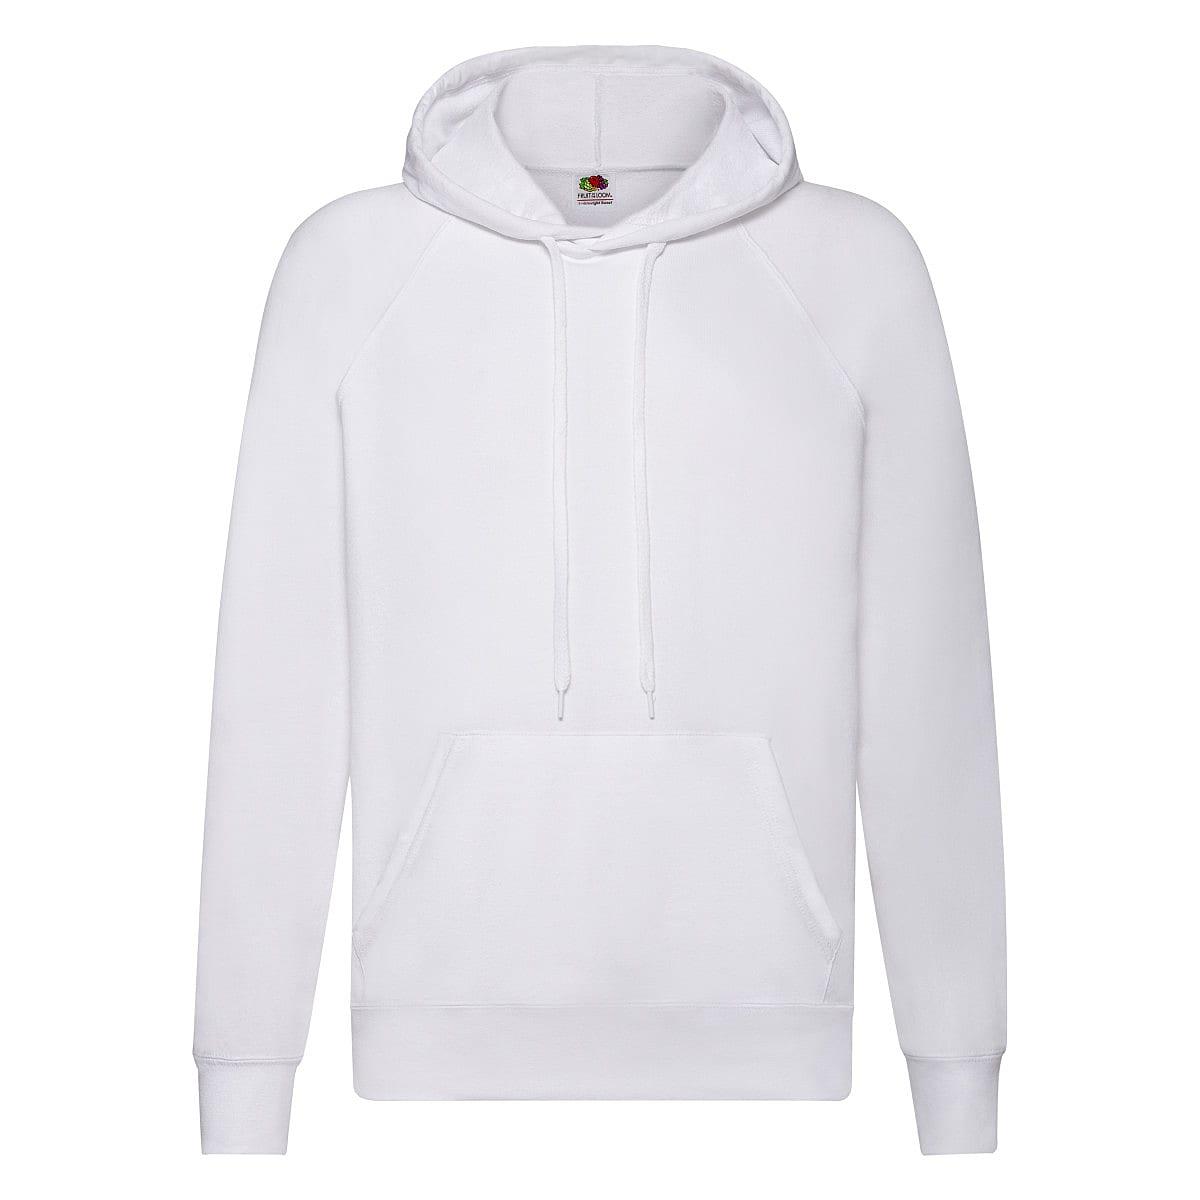 Fruit Of The Loom Mens Lightweight Hoodie in White (Product Code: 62140)